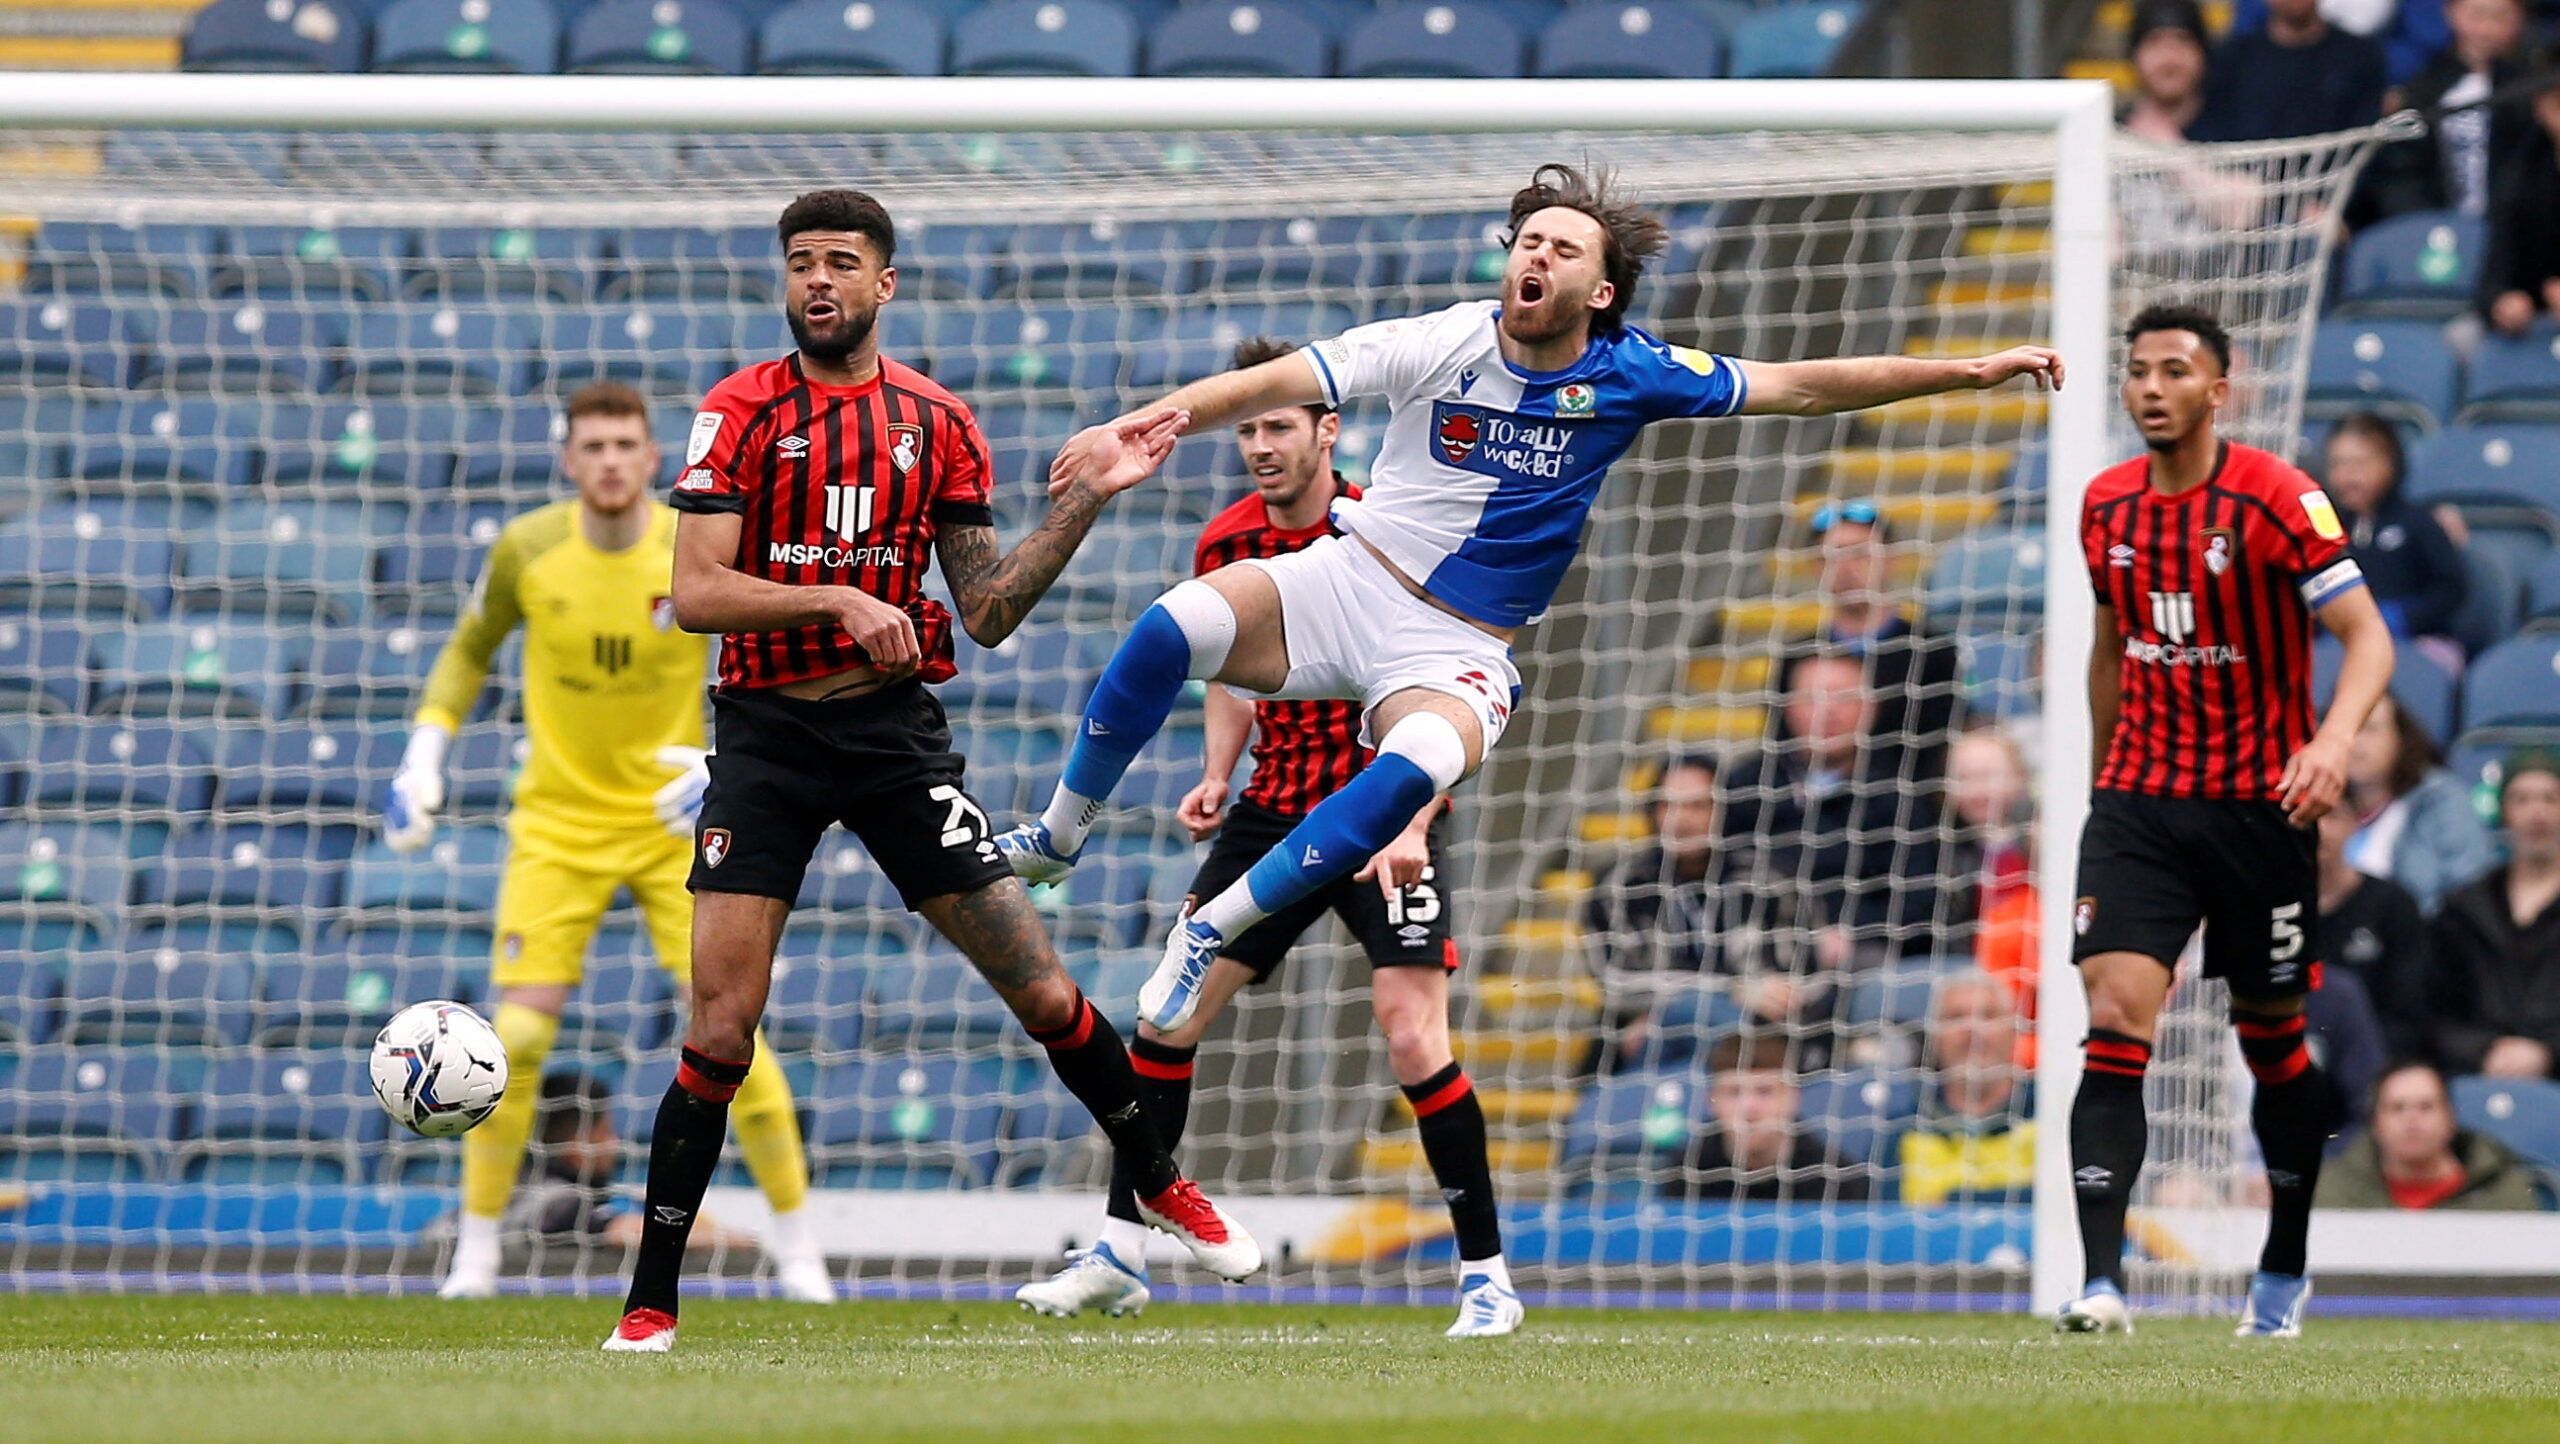 Soccer Football - Championship - Blackburn Rovers v AFC Bournemouth - Ewood Park, Blackburn, Britain - April 30, 2022  AFC Bournemouth's Philip Billing in action with Blackburn Rovers' Ben Brereton Diaz  Action Images/Craig Brough  EDITORIAL USE ONLY. No use with unauthorized audio, video, data, fixture lists, club/league logos or 